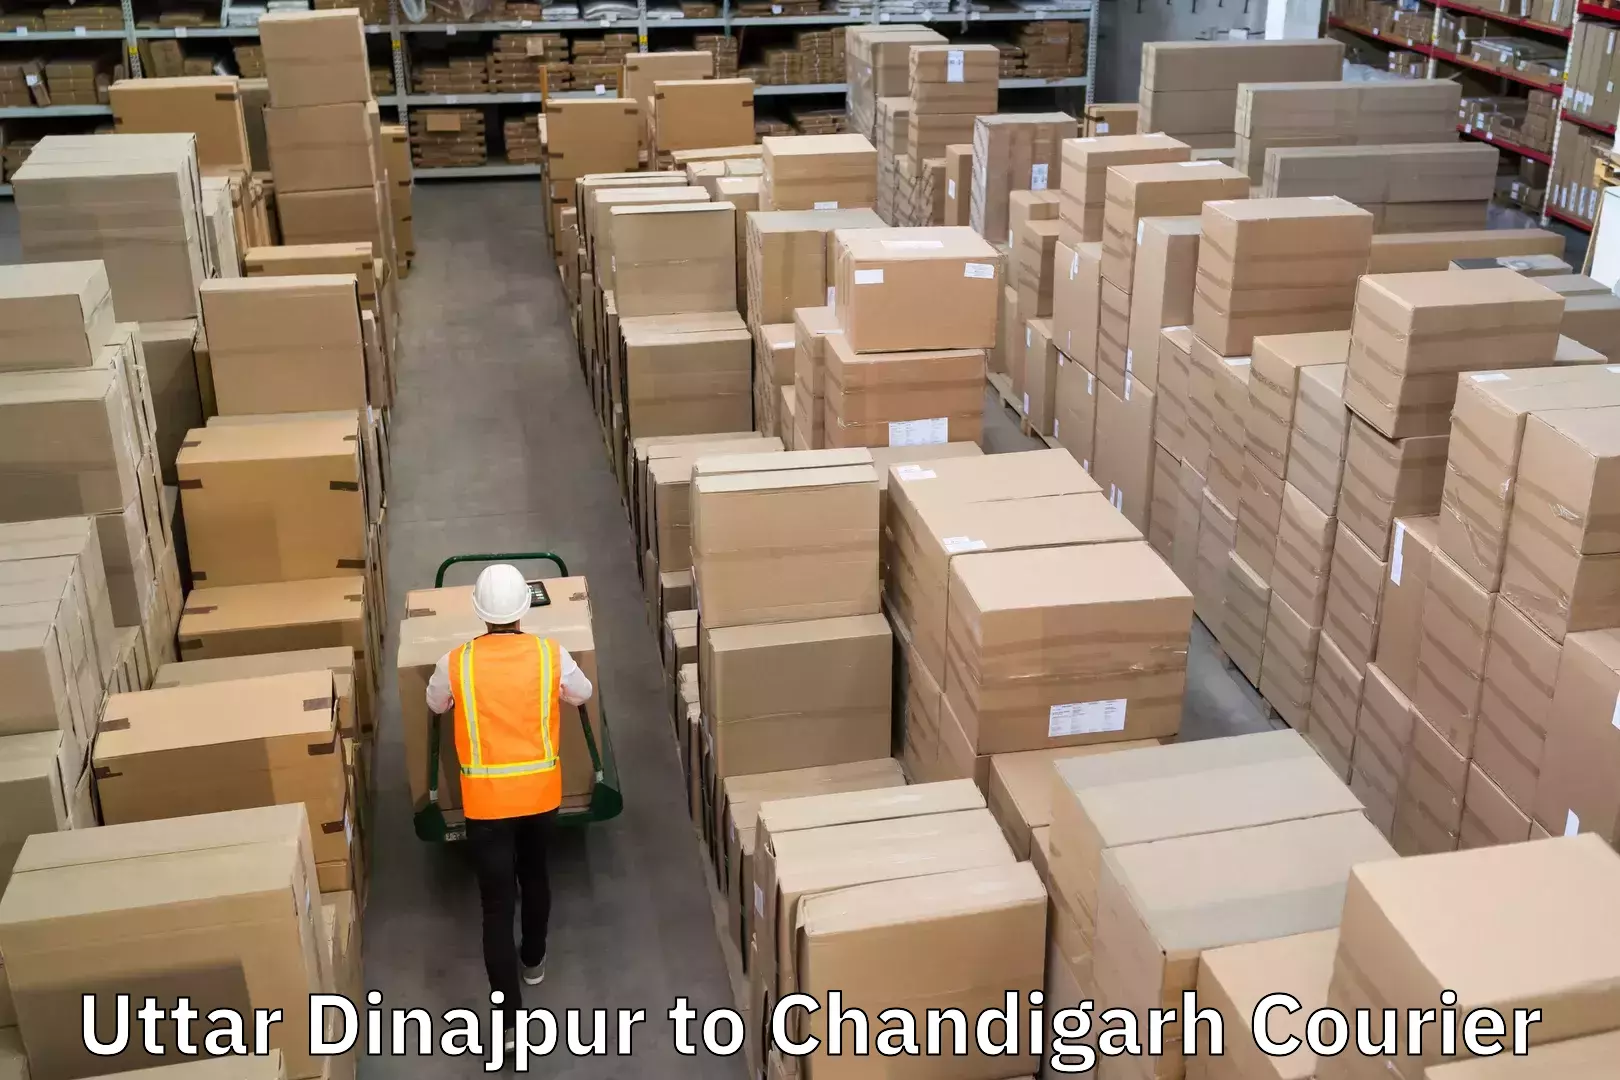 On-call courier service Uttar Dinajpur to Chandigarh